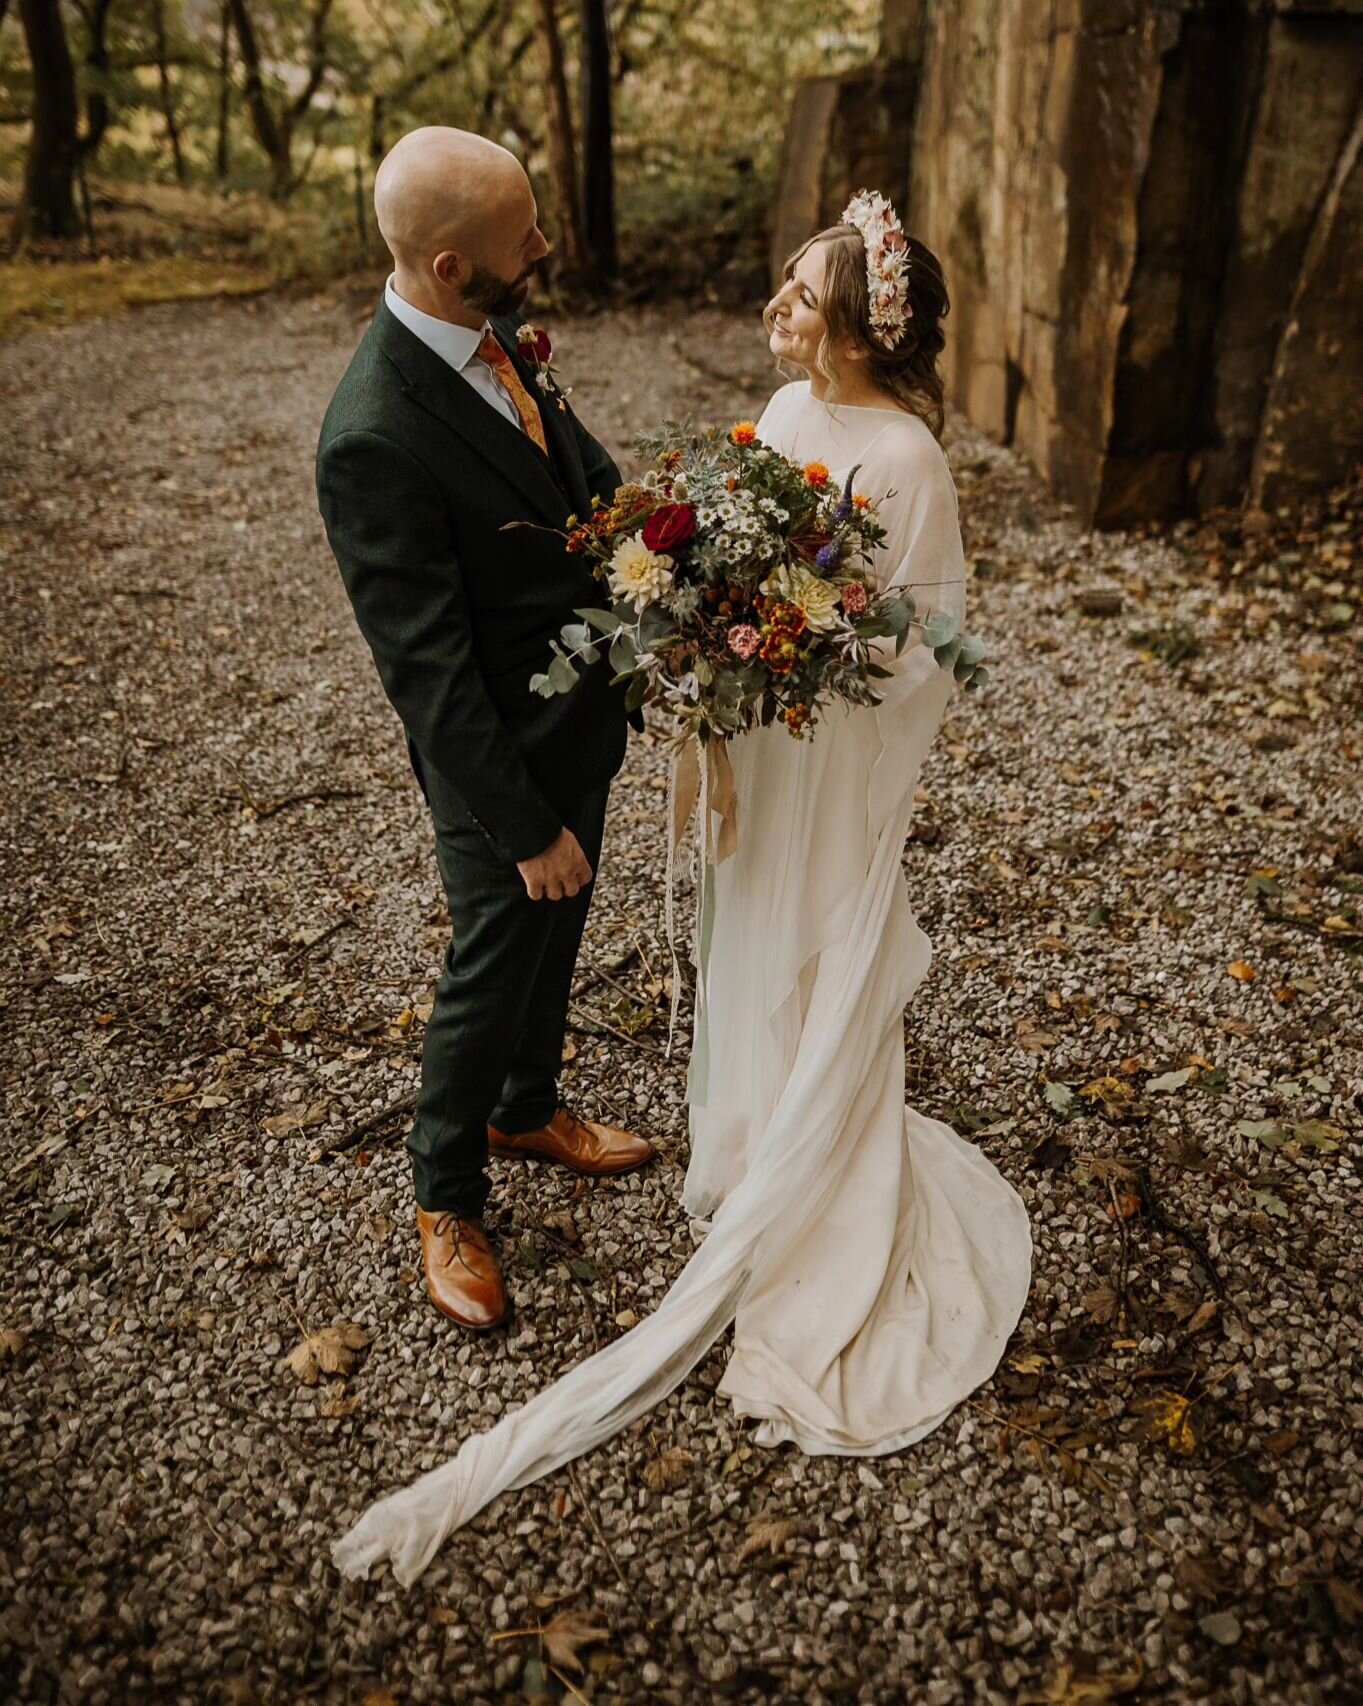 E&amp;D // This dress. These flowers. This wonderful rustic backdrop. A perfect autumn wedding at Torr Vale Mills ! 🍂

@weddingsattorrvalemill #torrvalemillwedding  #newmills #peakdistrictwedding #peakdistrictweddingphotographer